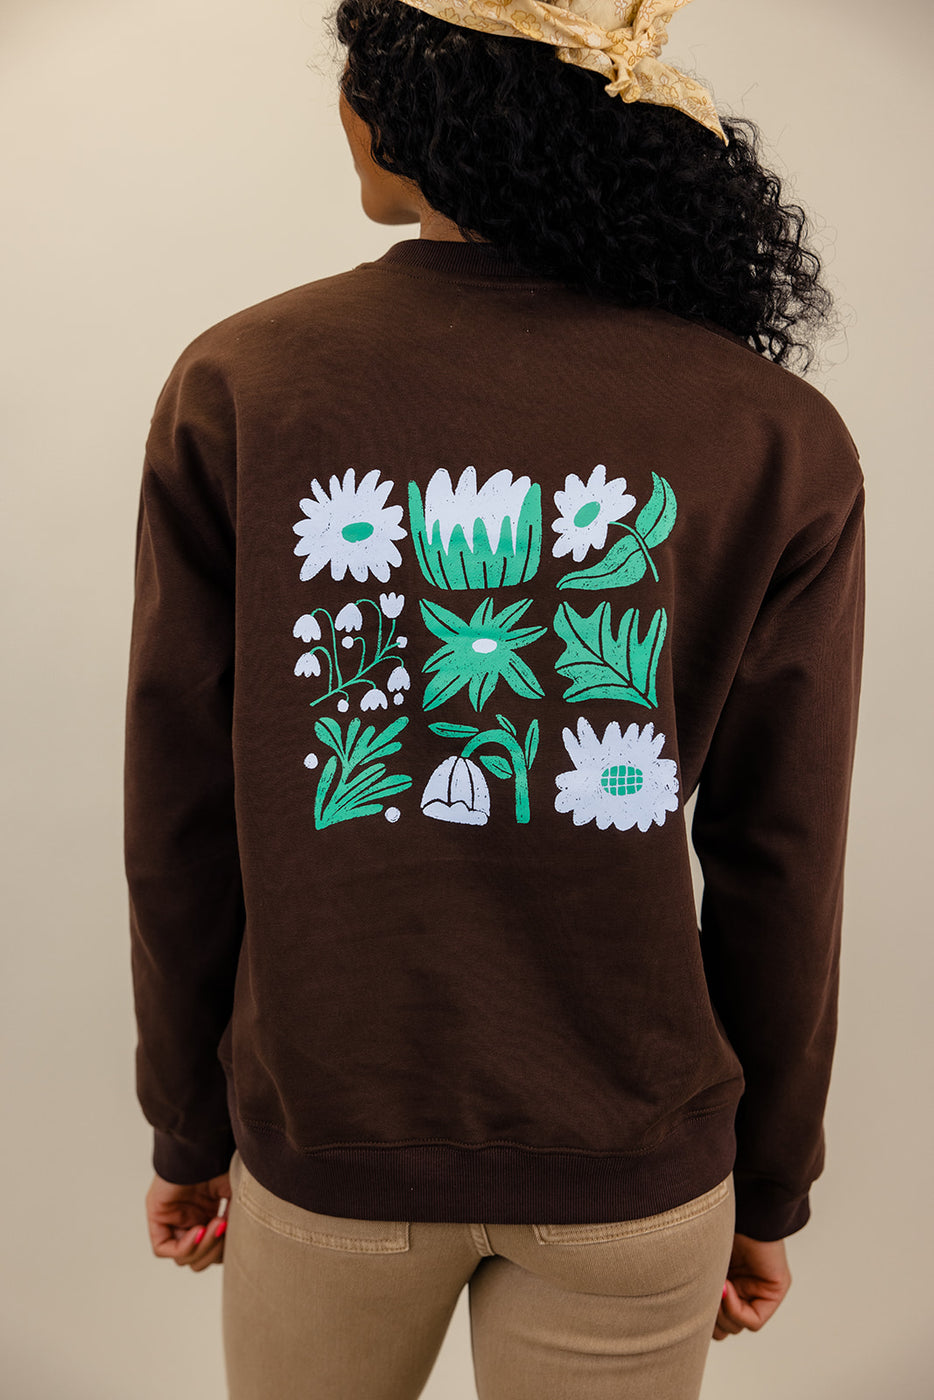 a person wearing a brown sweatshirt with white and green designs on it